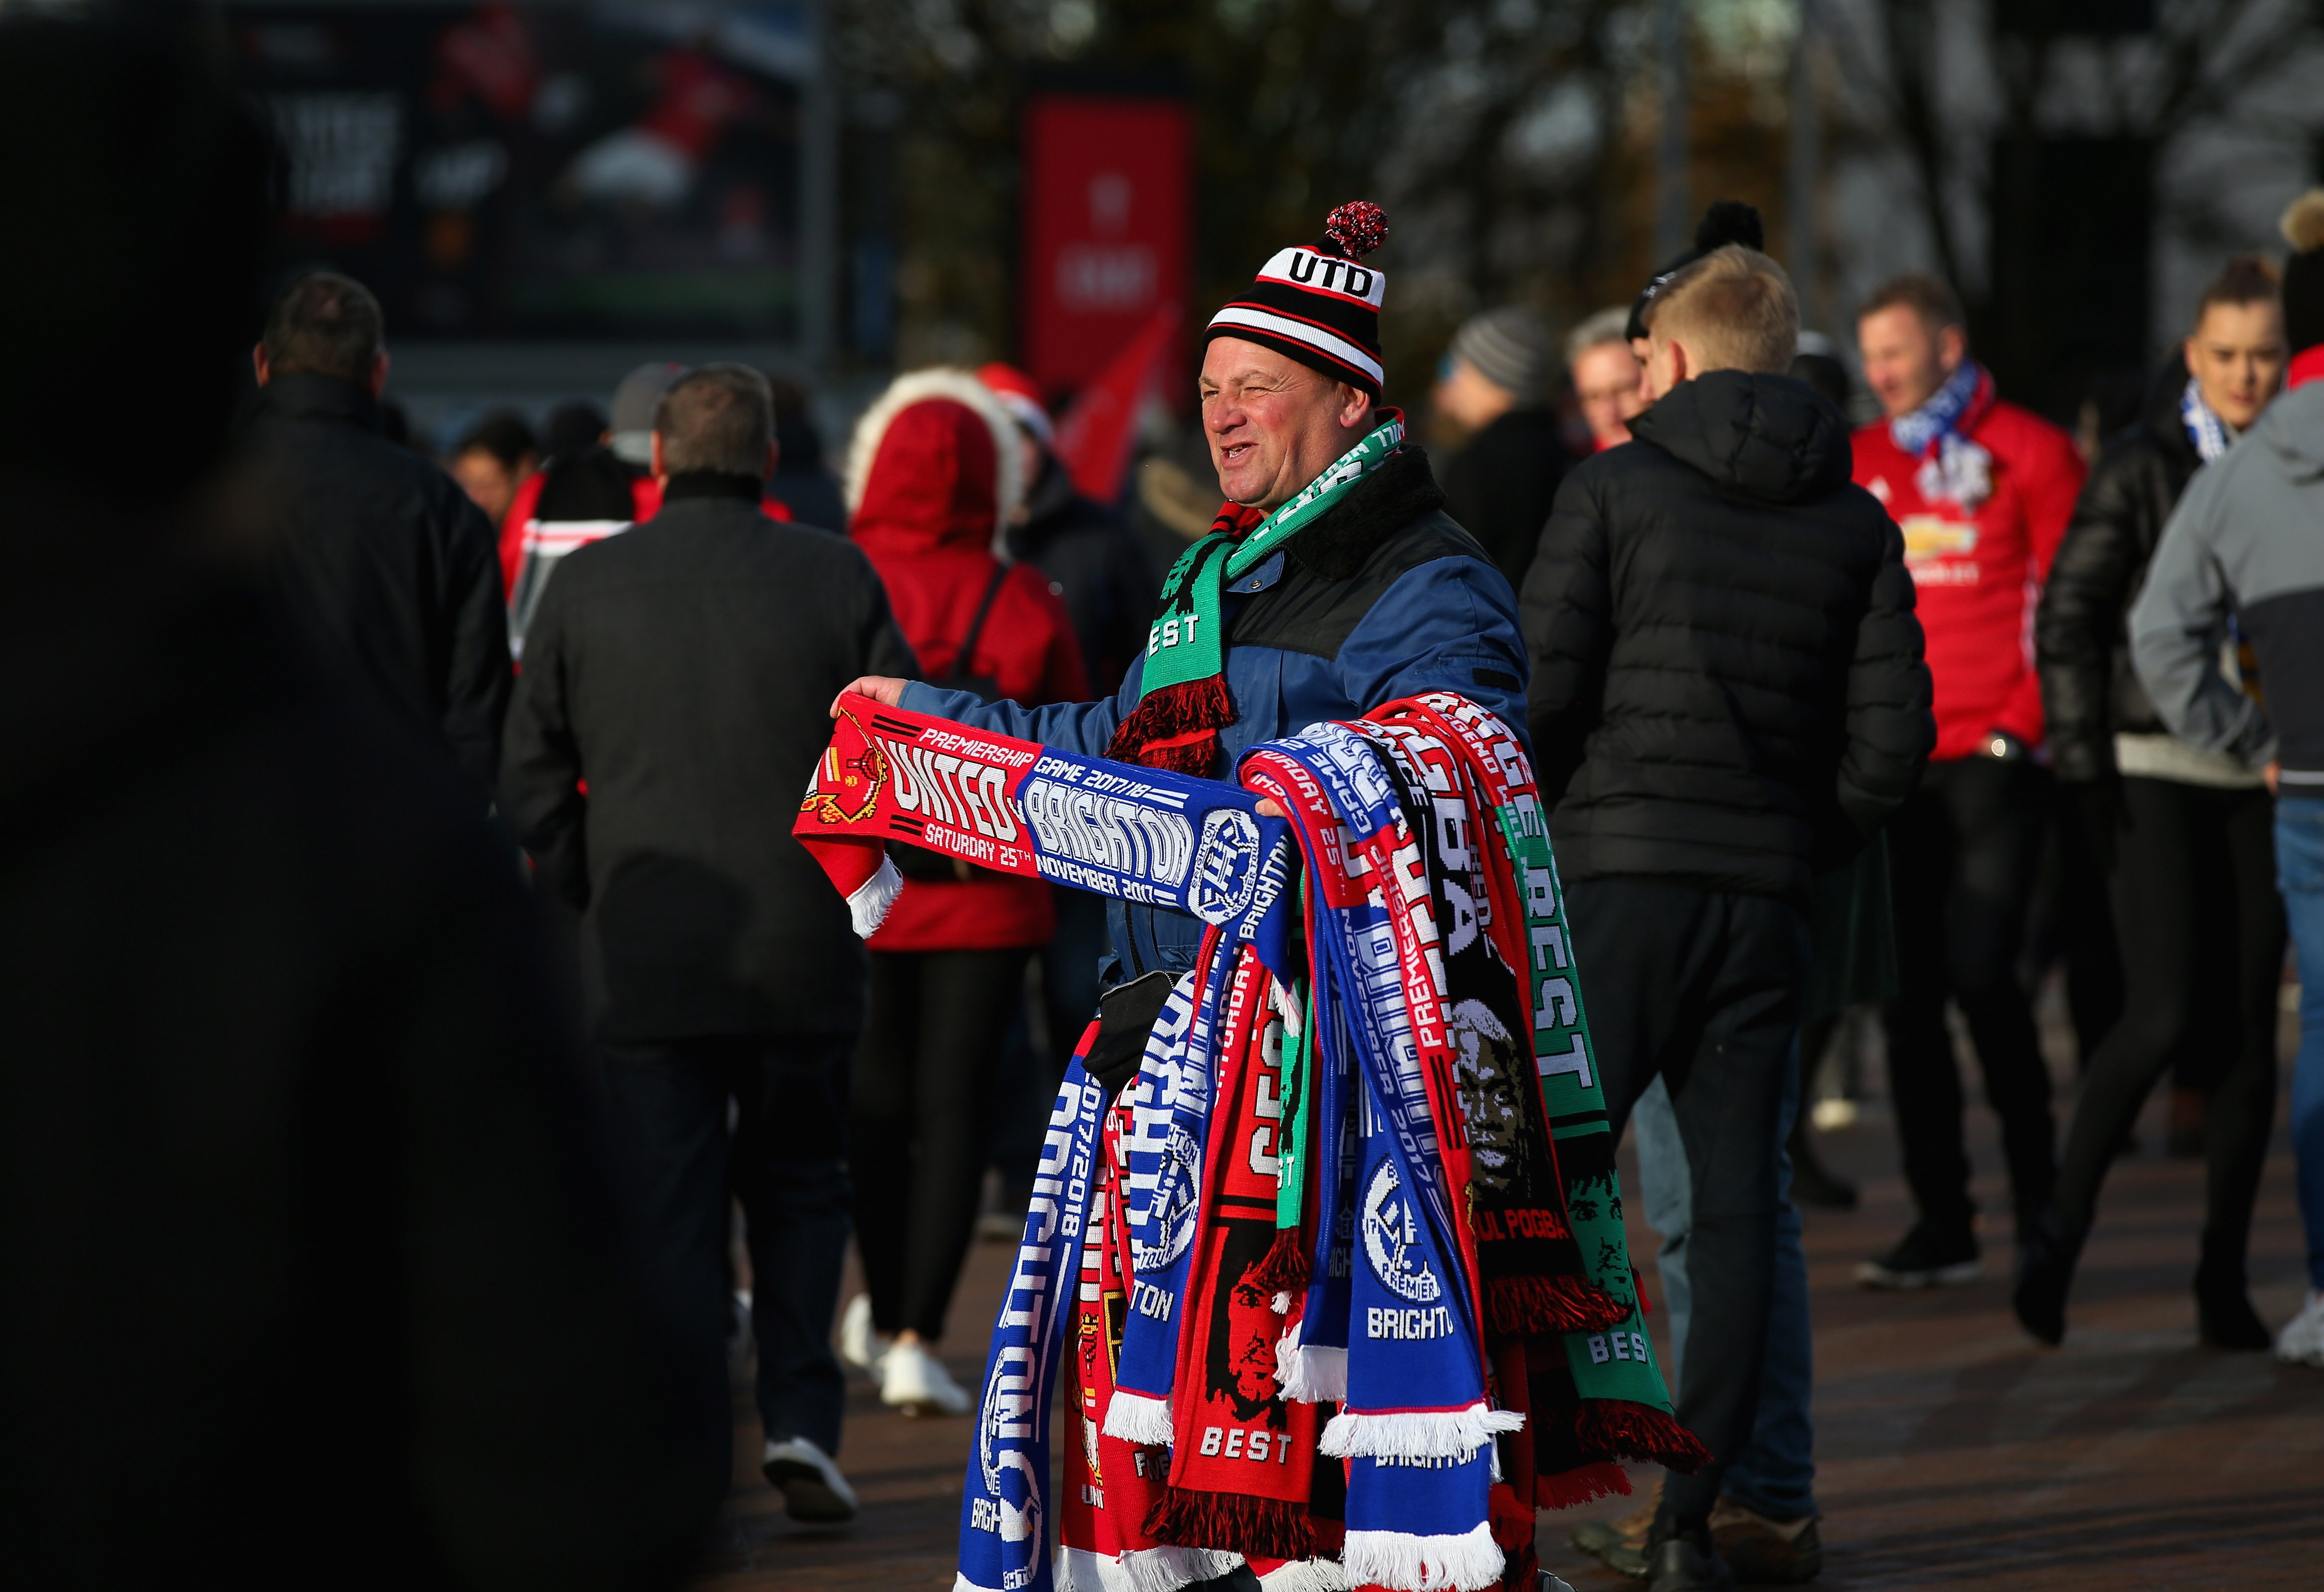 MANCHESTER, ENGLAND - NOVEMBER 25:  A scarf seller is seen outside Old Trafford prior to the Premier League match between Manchester United and Brighton and Hove Albion at Old Trafford on November 25, 2017 in Manchester, England.  (Photo by Alex Livesey/Getty Images)